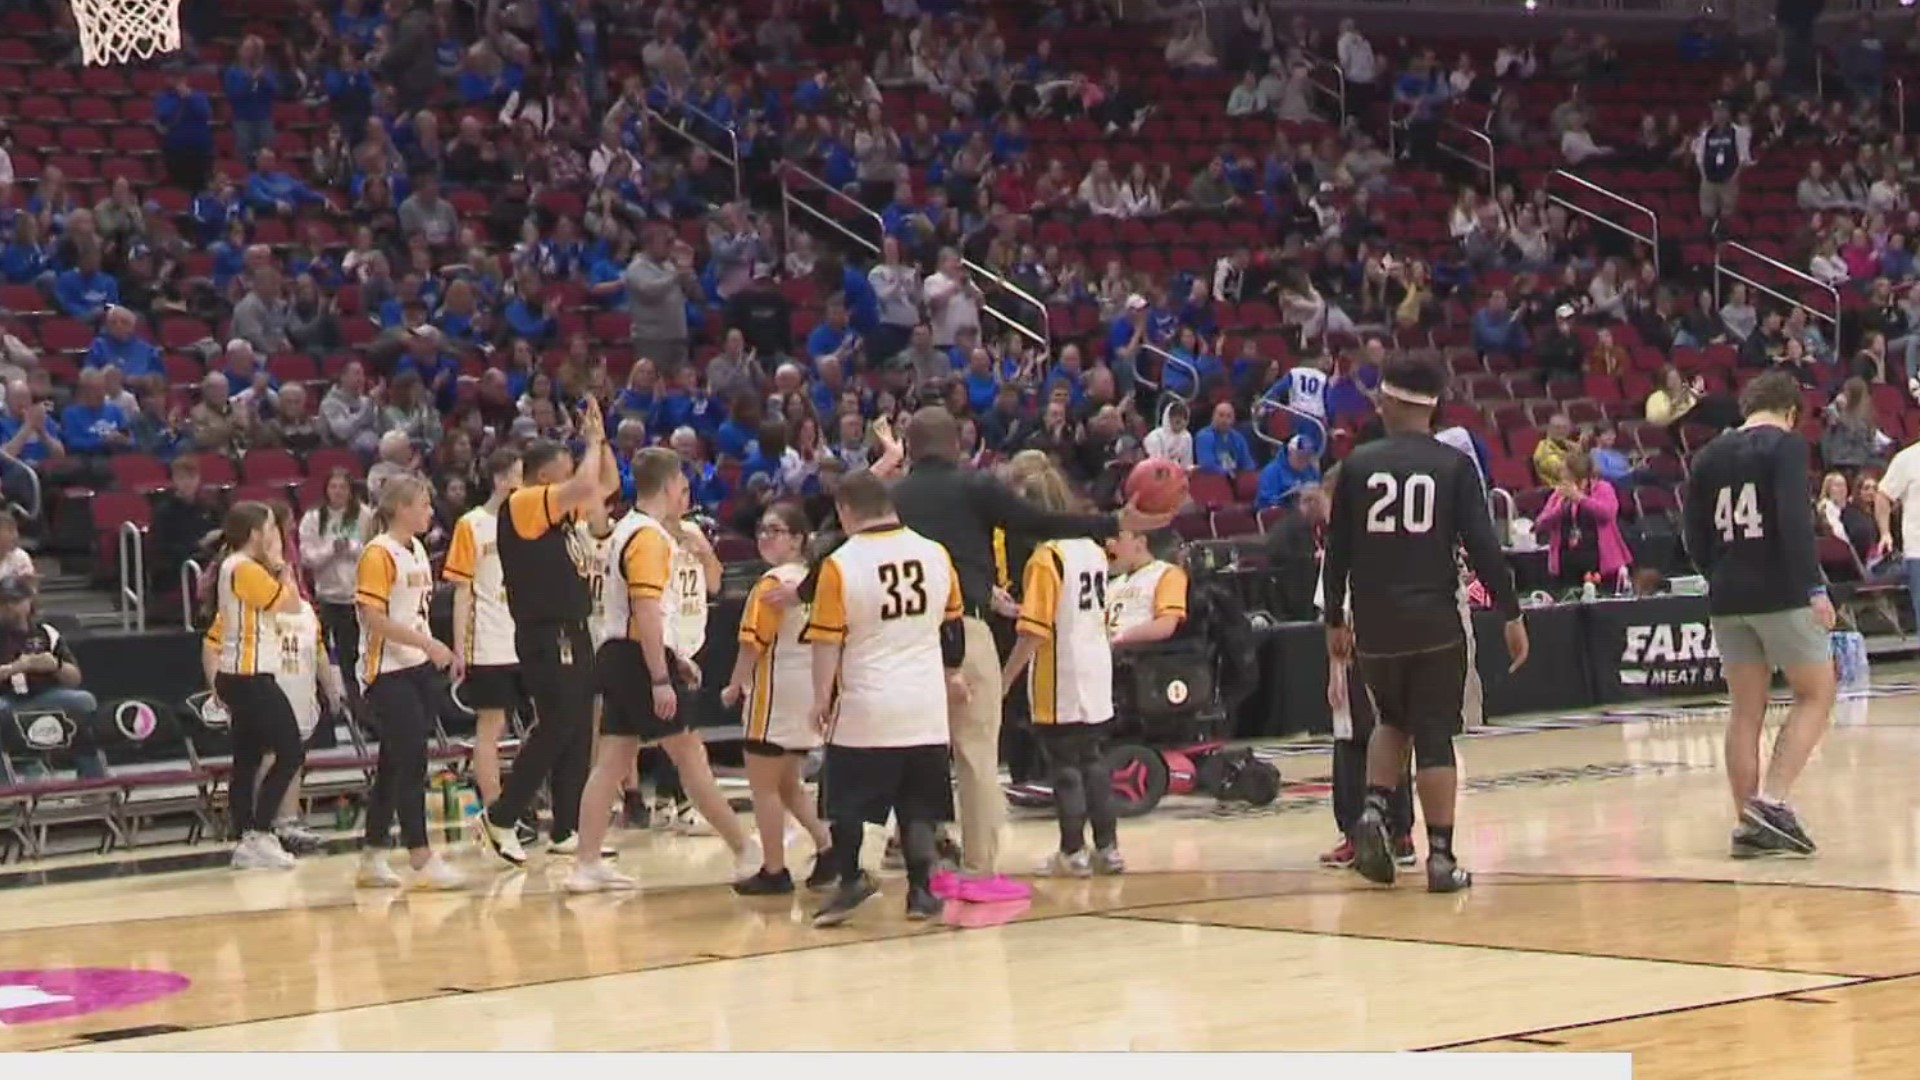 The Southeast Polk and Ankeny Centennial unified basketball teams took the floor during halftime of the Class 2A girls state tournament semifinal game.